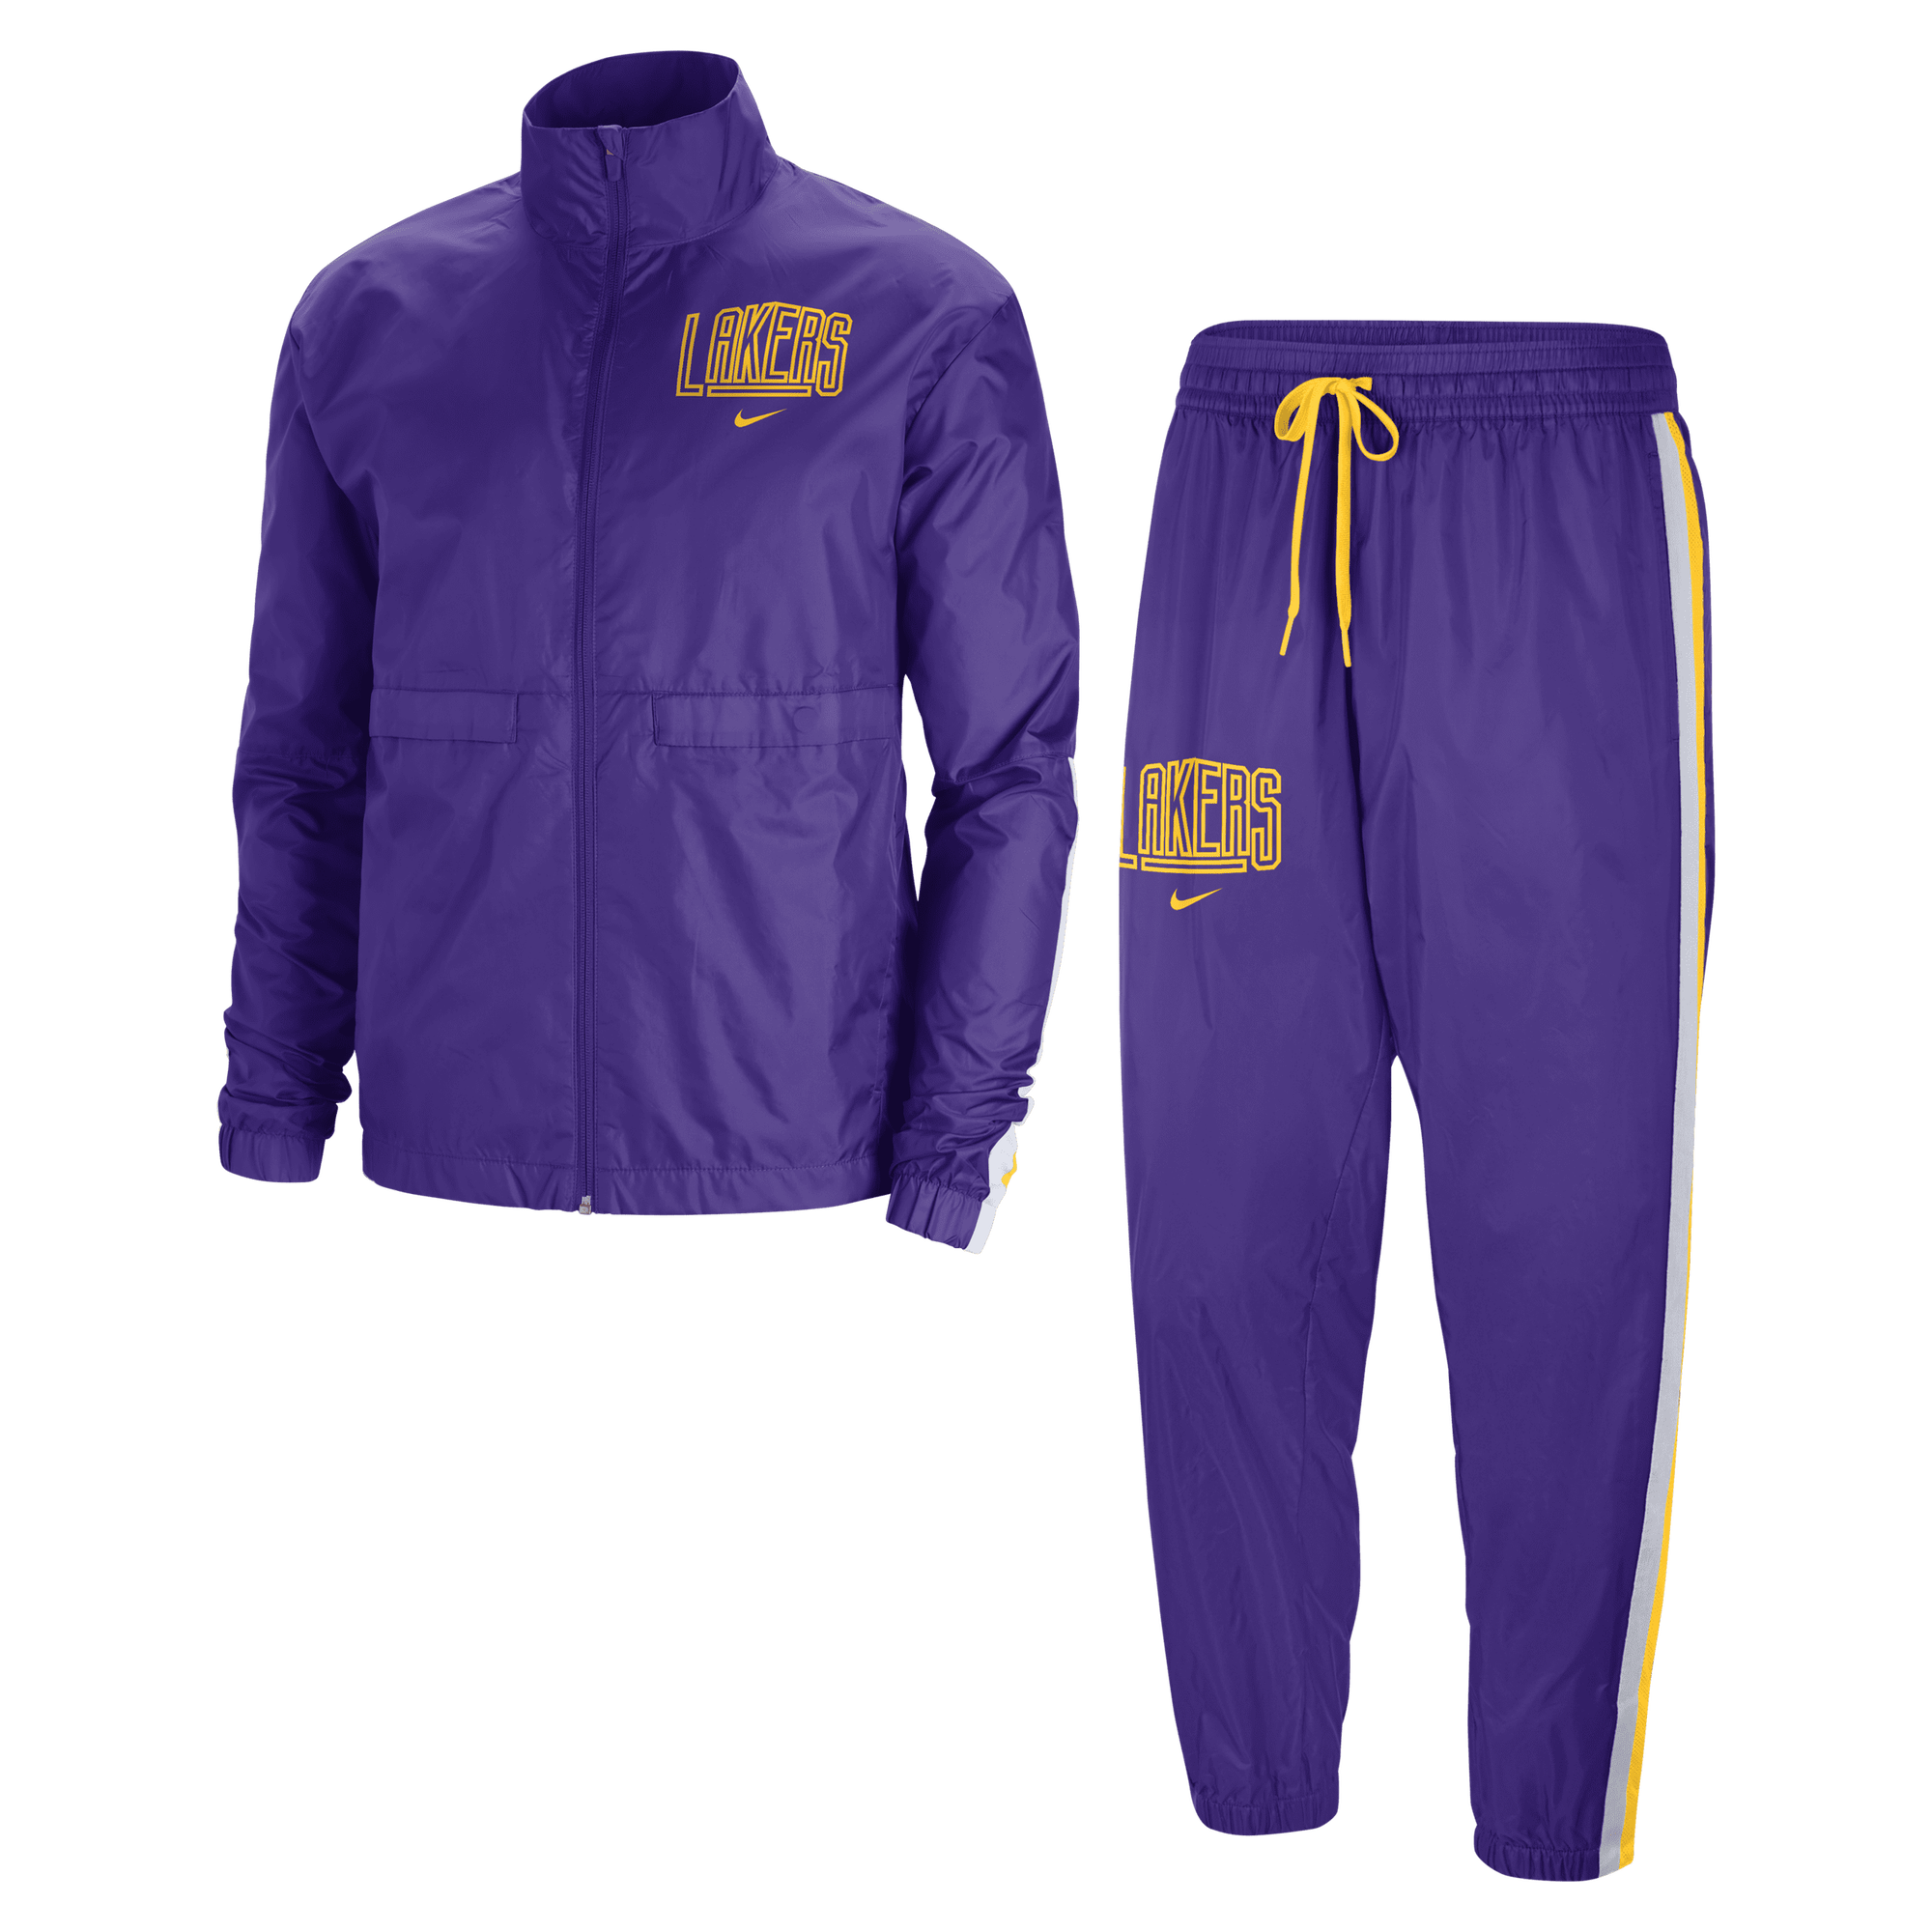 Nike Men's Los Angeles Lakers Courtside Tracksuit in Kuwait